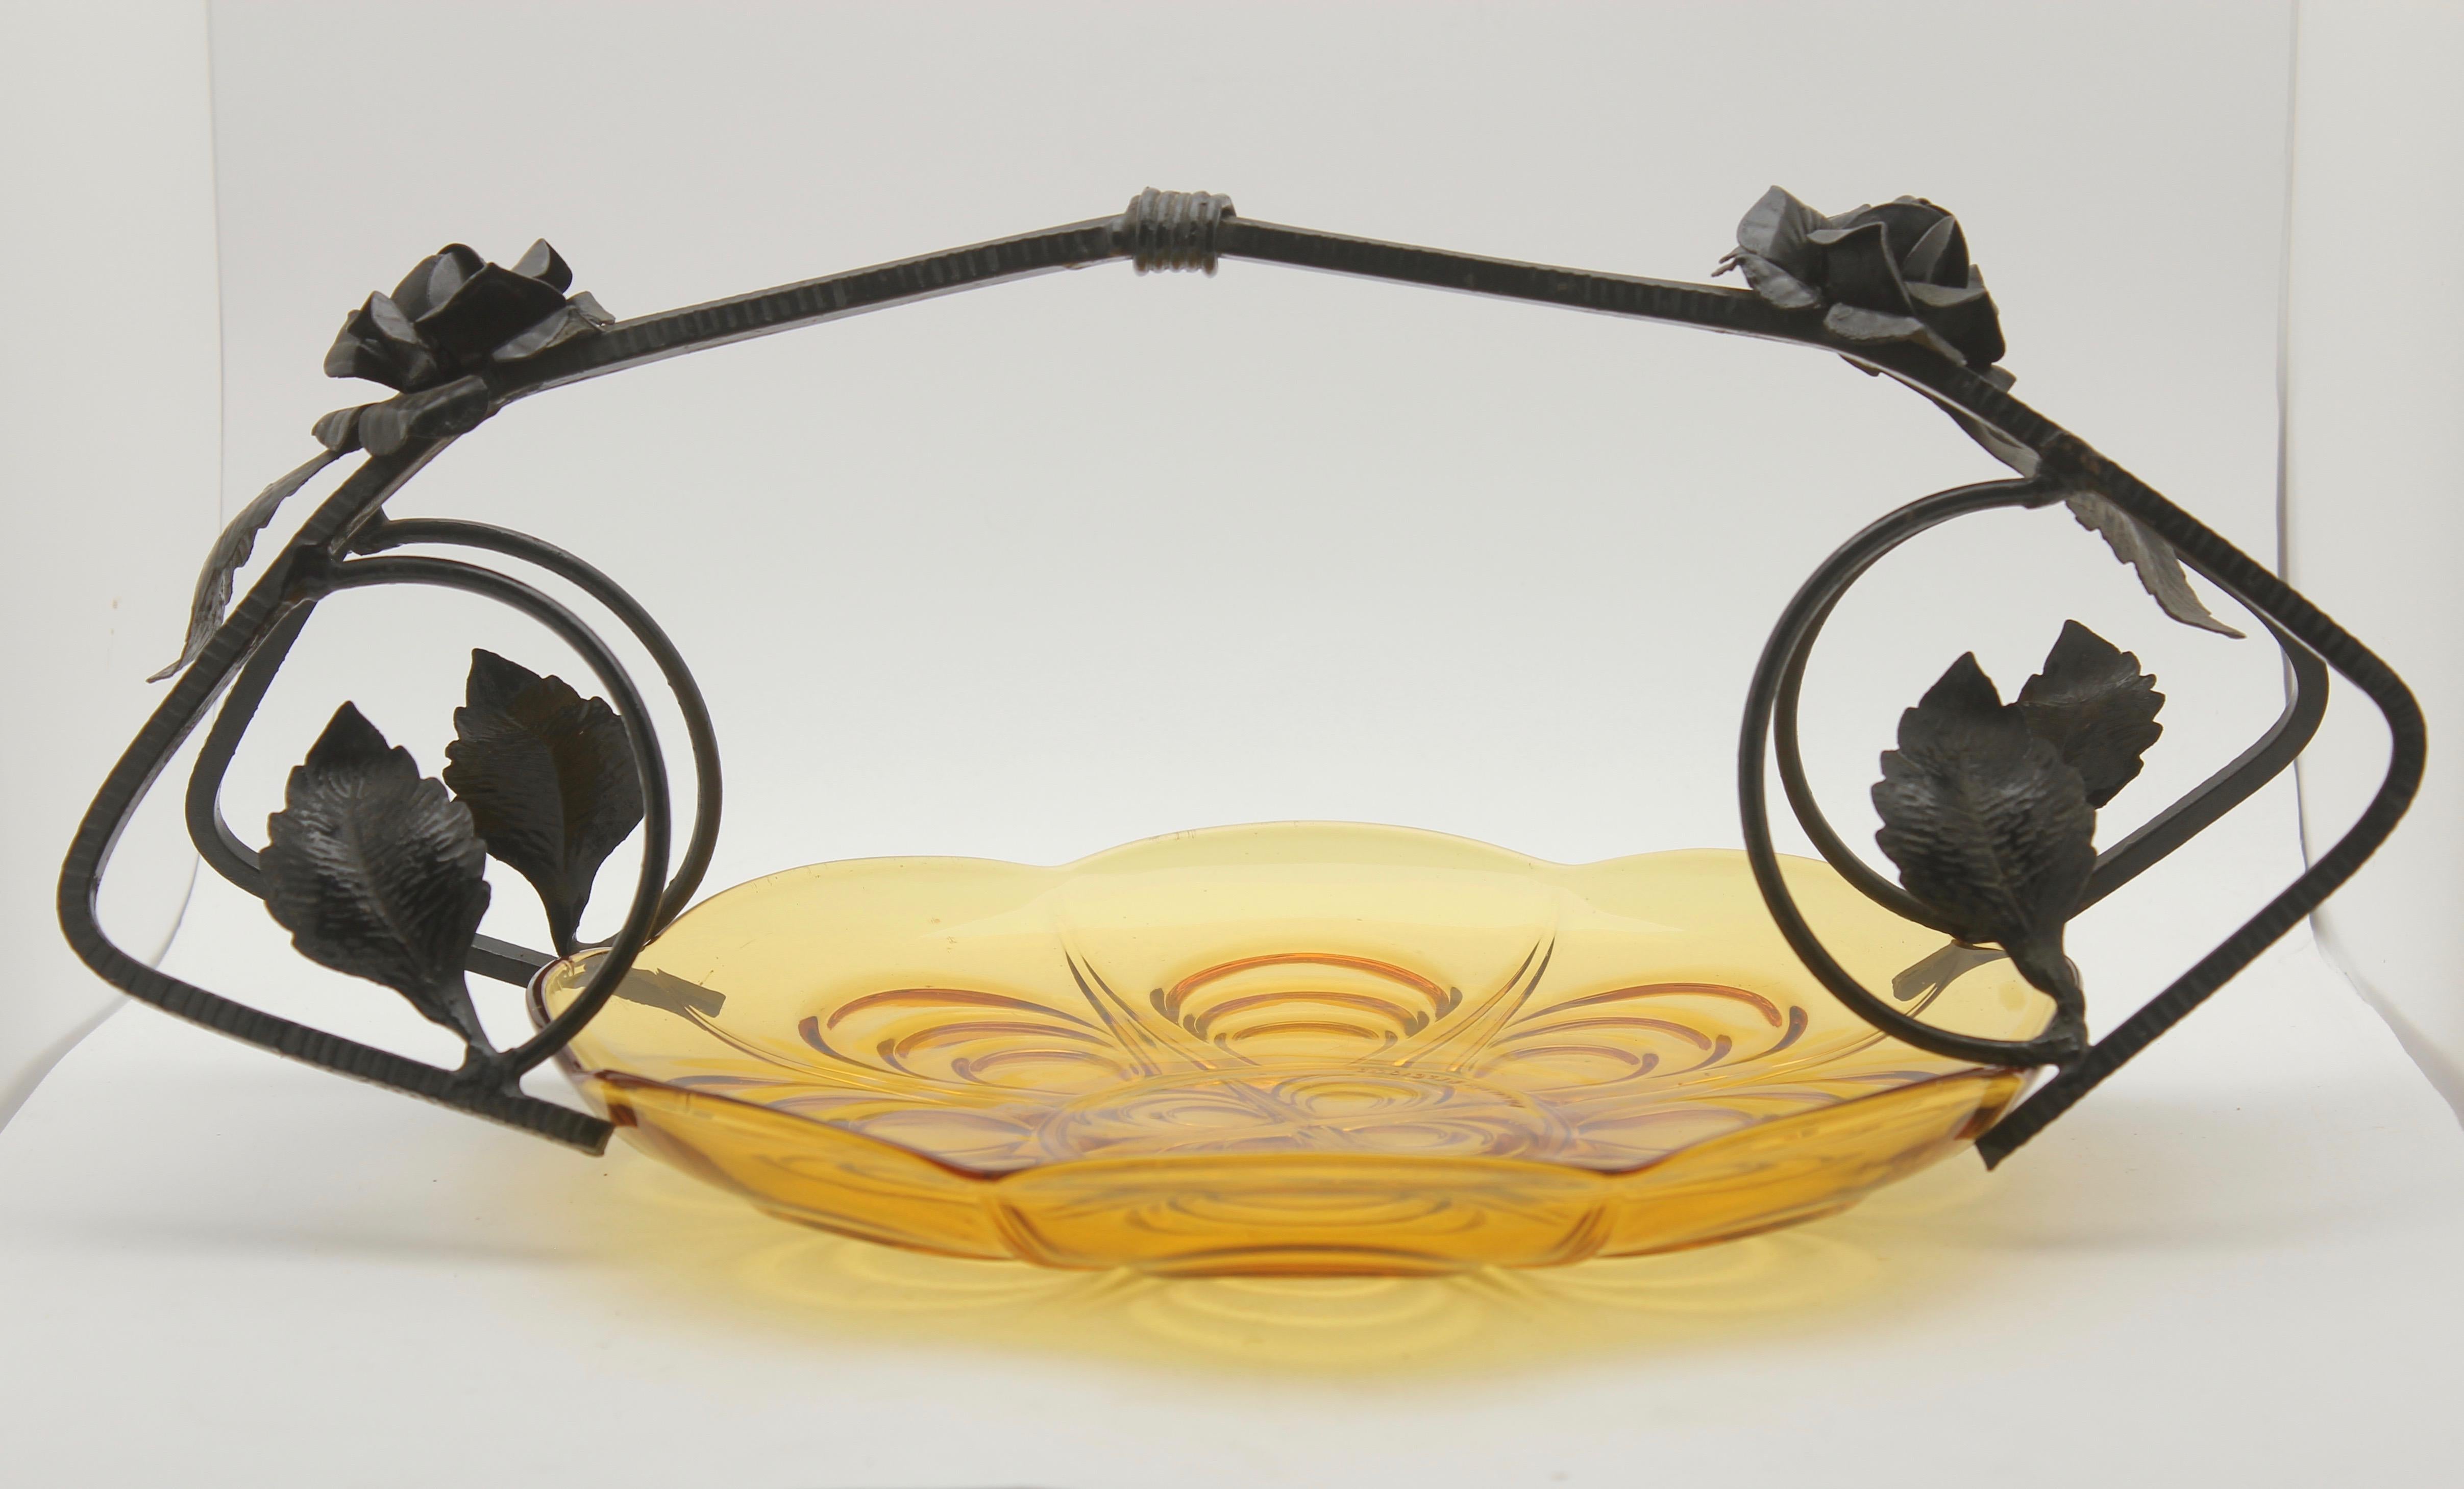 Art Deco Gateau Set, Pressed Glass Dish with Handle or Carrier in Wrought Iron In Good Condition For Sale In Verviers, BE